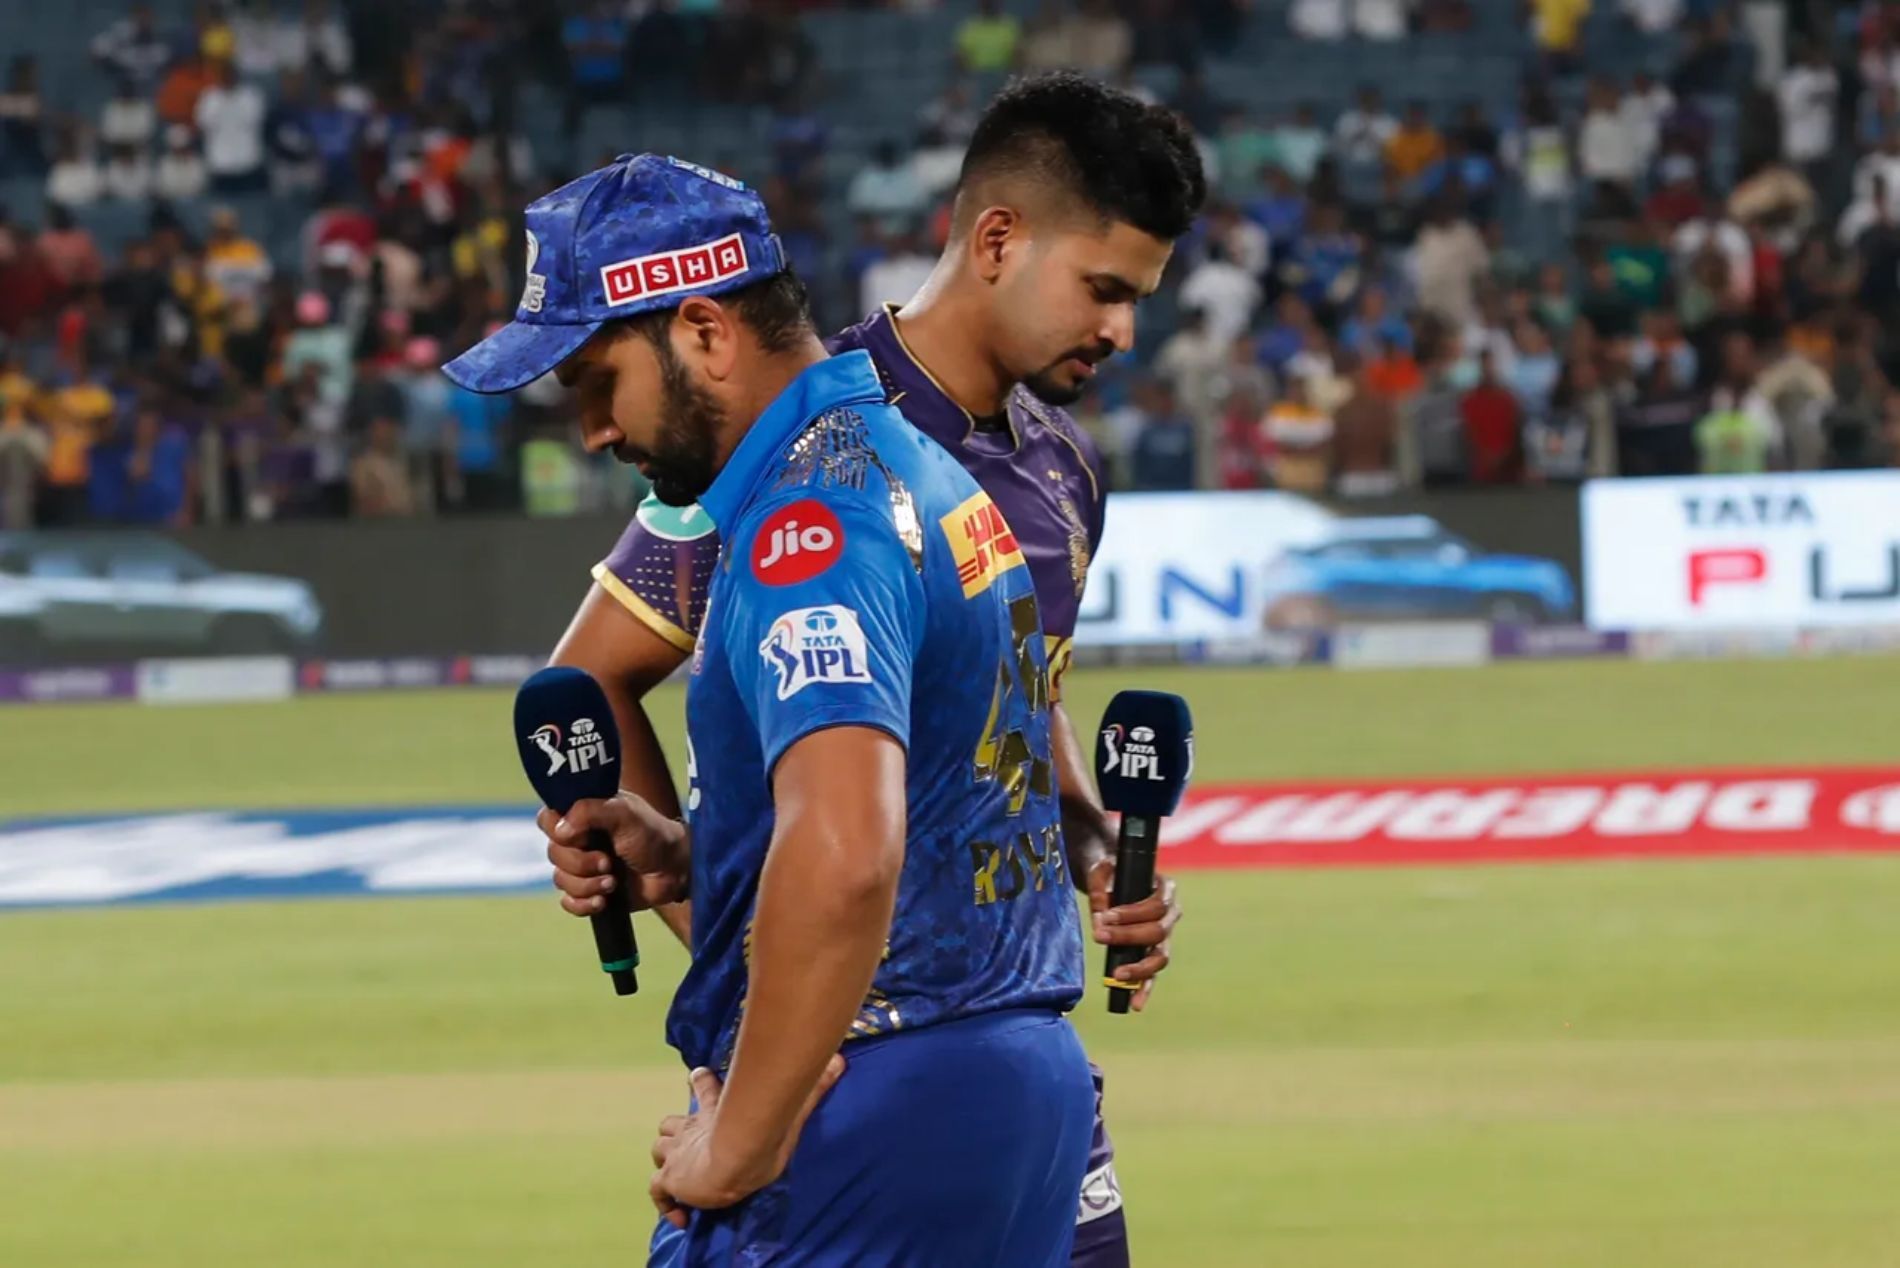 Rohit Sharma of MI and Shreyas Iyer of KKR after the toss for Match 14. While Kolkata are in second place in the points table with three wins and two losses, Mumbai have lost five in a row.